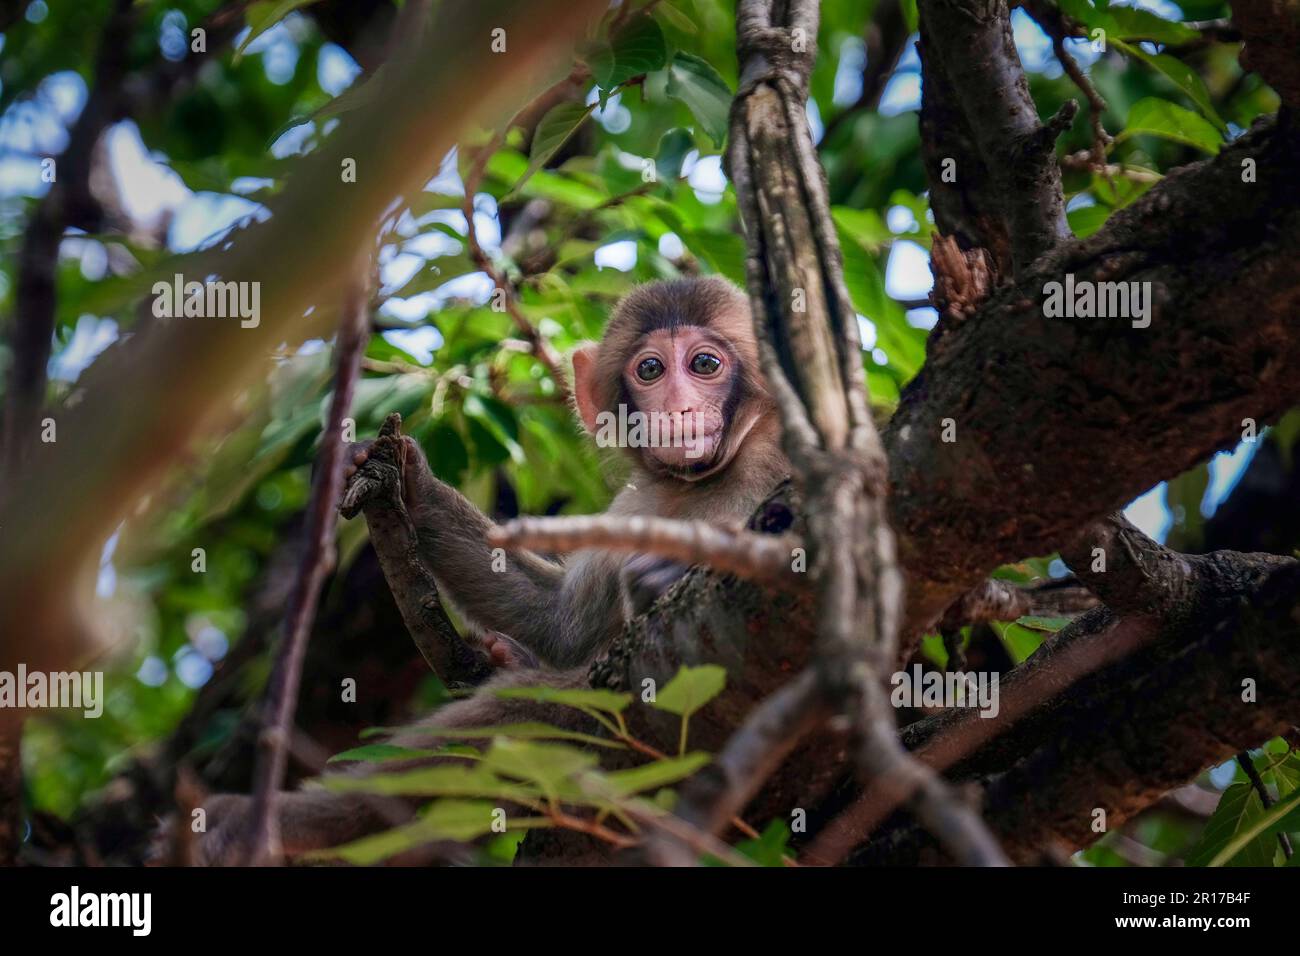 Baby macaque monkey sitting in a tree amongst the leaves and branches. Kyoto, Japan Stock Photo